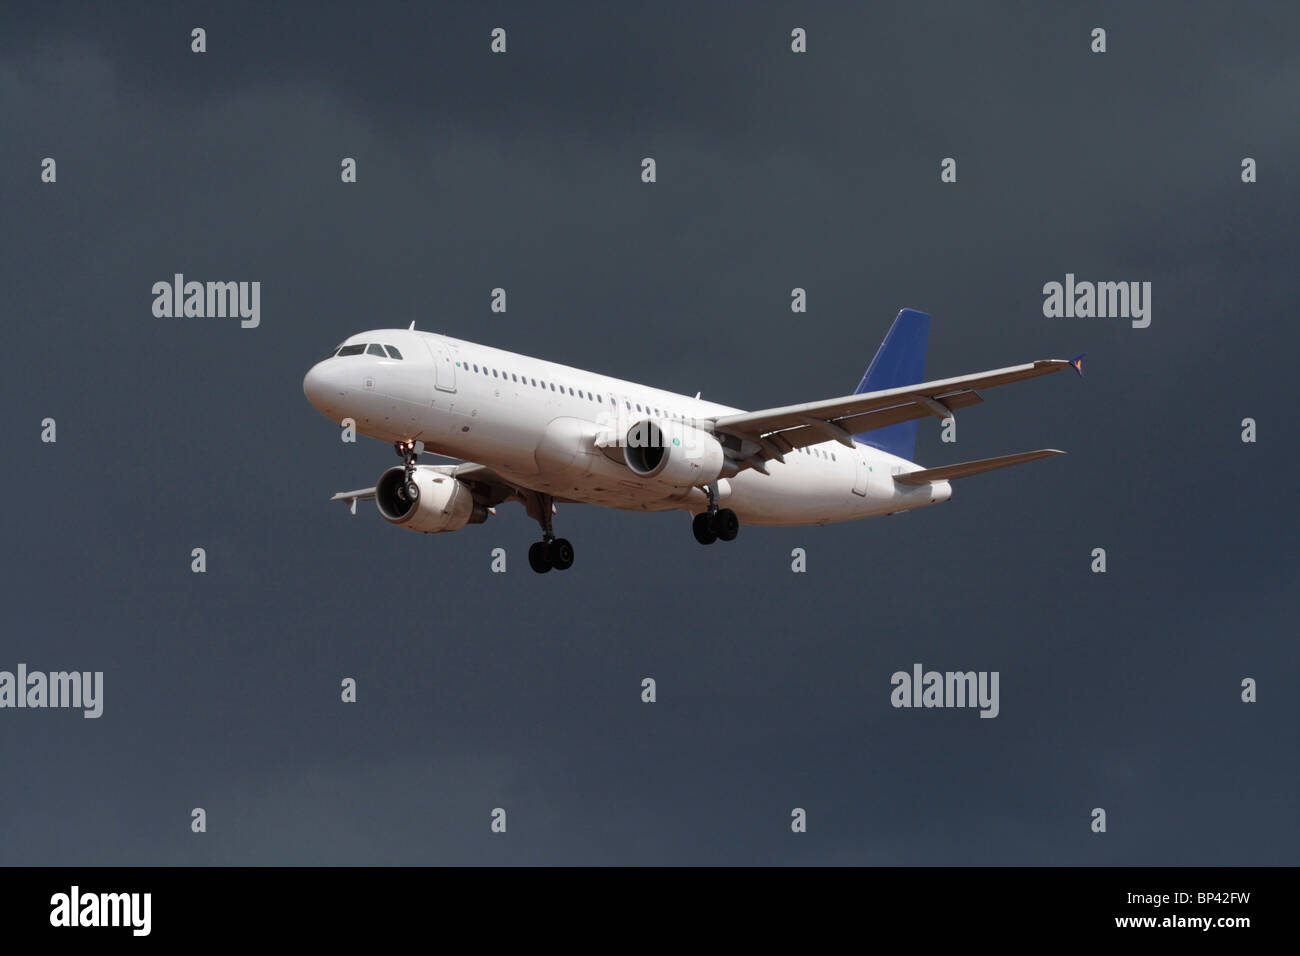 Airbus A320 passenger jet plane flying on approach in a dark cloudy sky. No livery and proprietary details deleted. Commercial air travel, aviation. Stock Photo